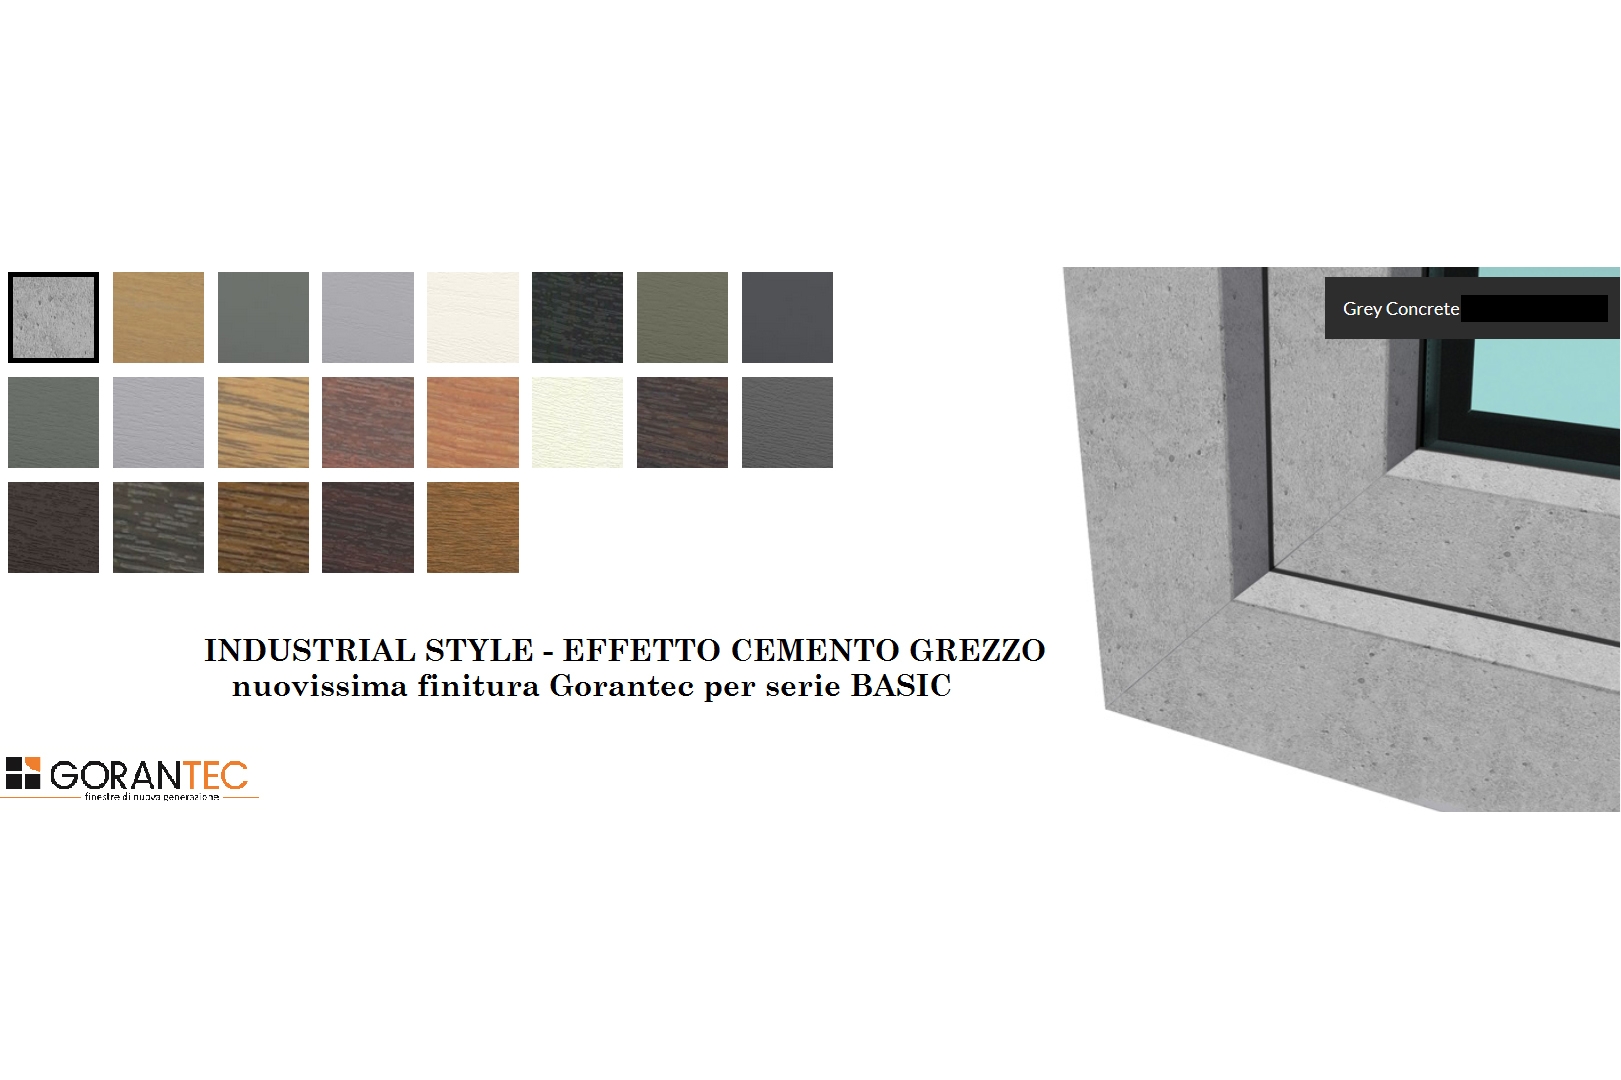 Grey Concrete – INDUSTRIAL STYLE